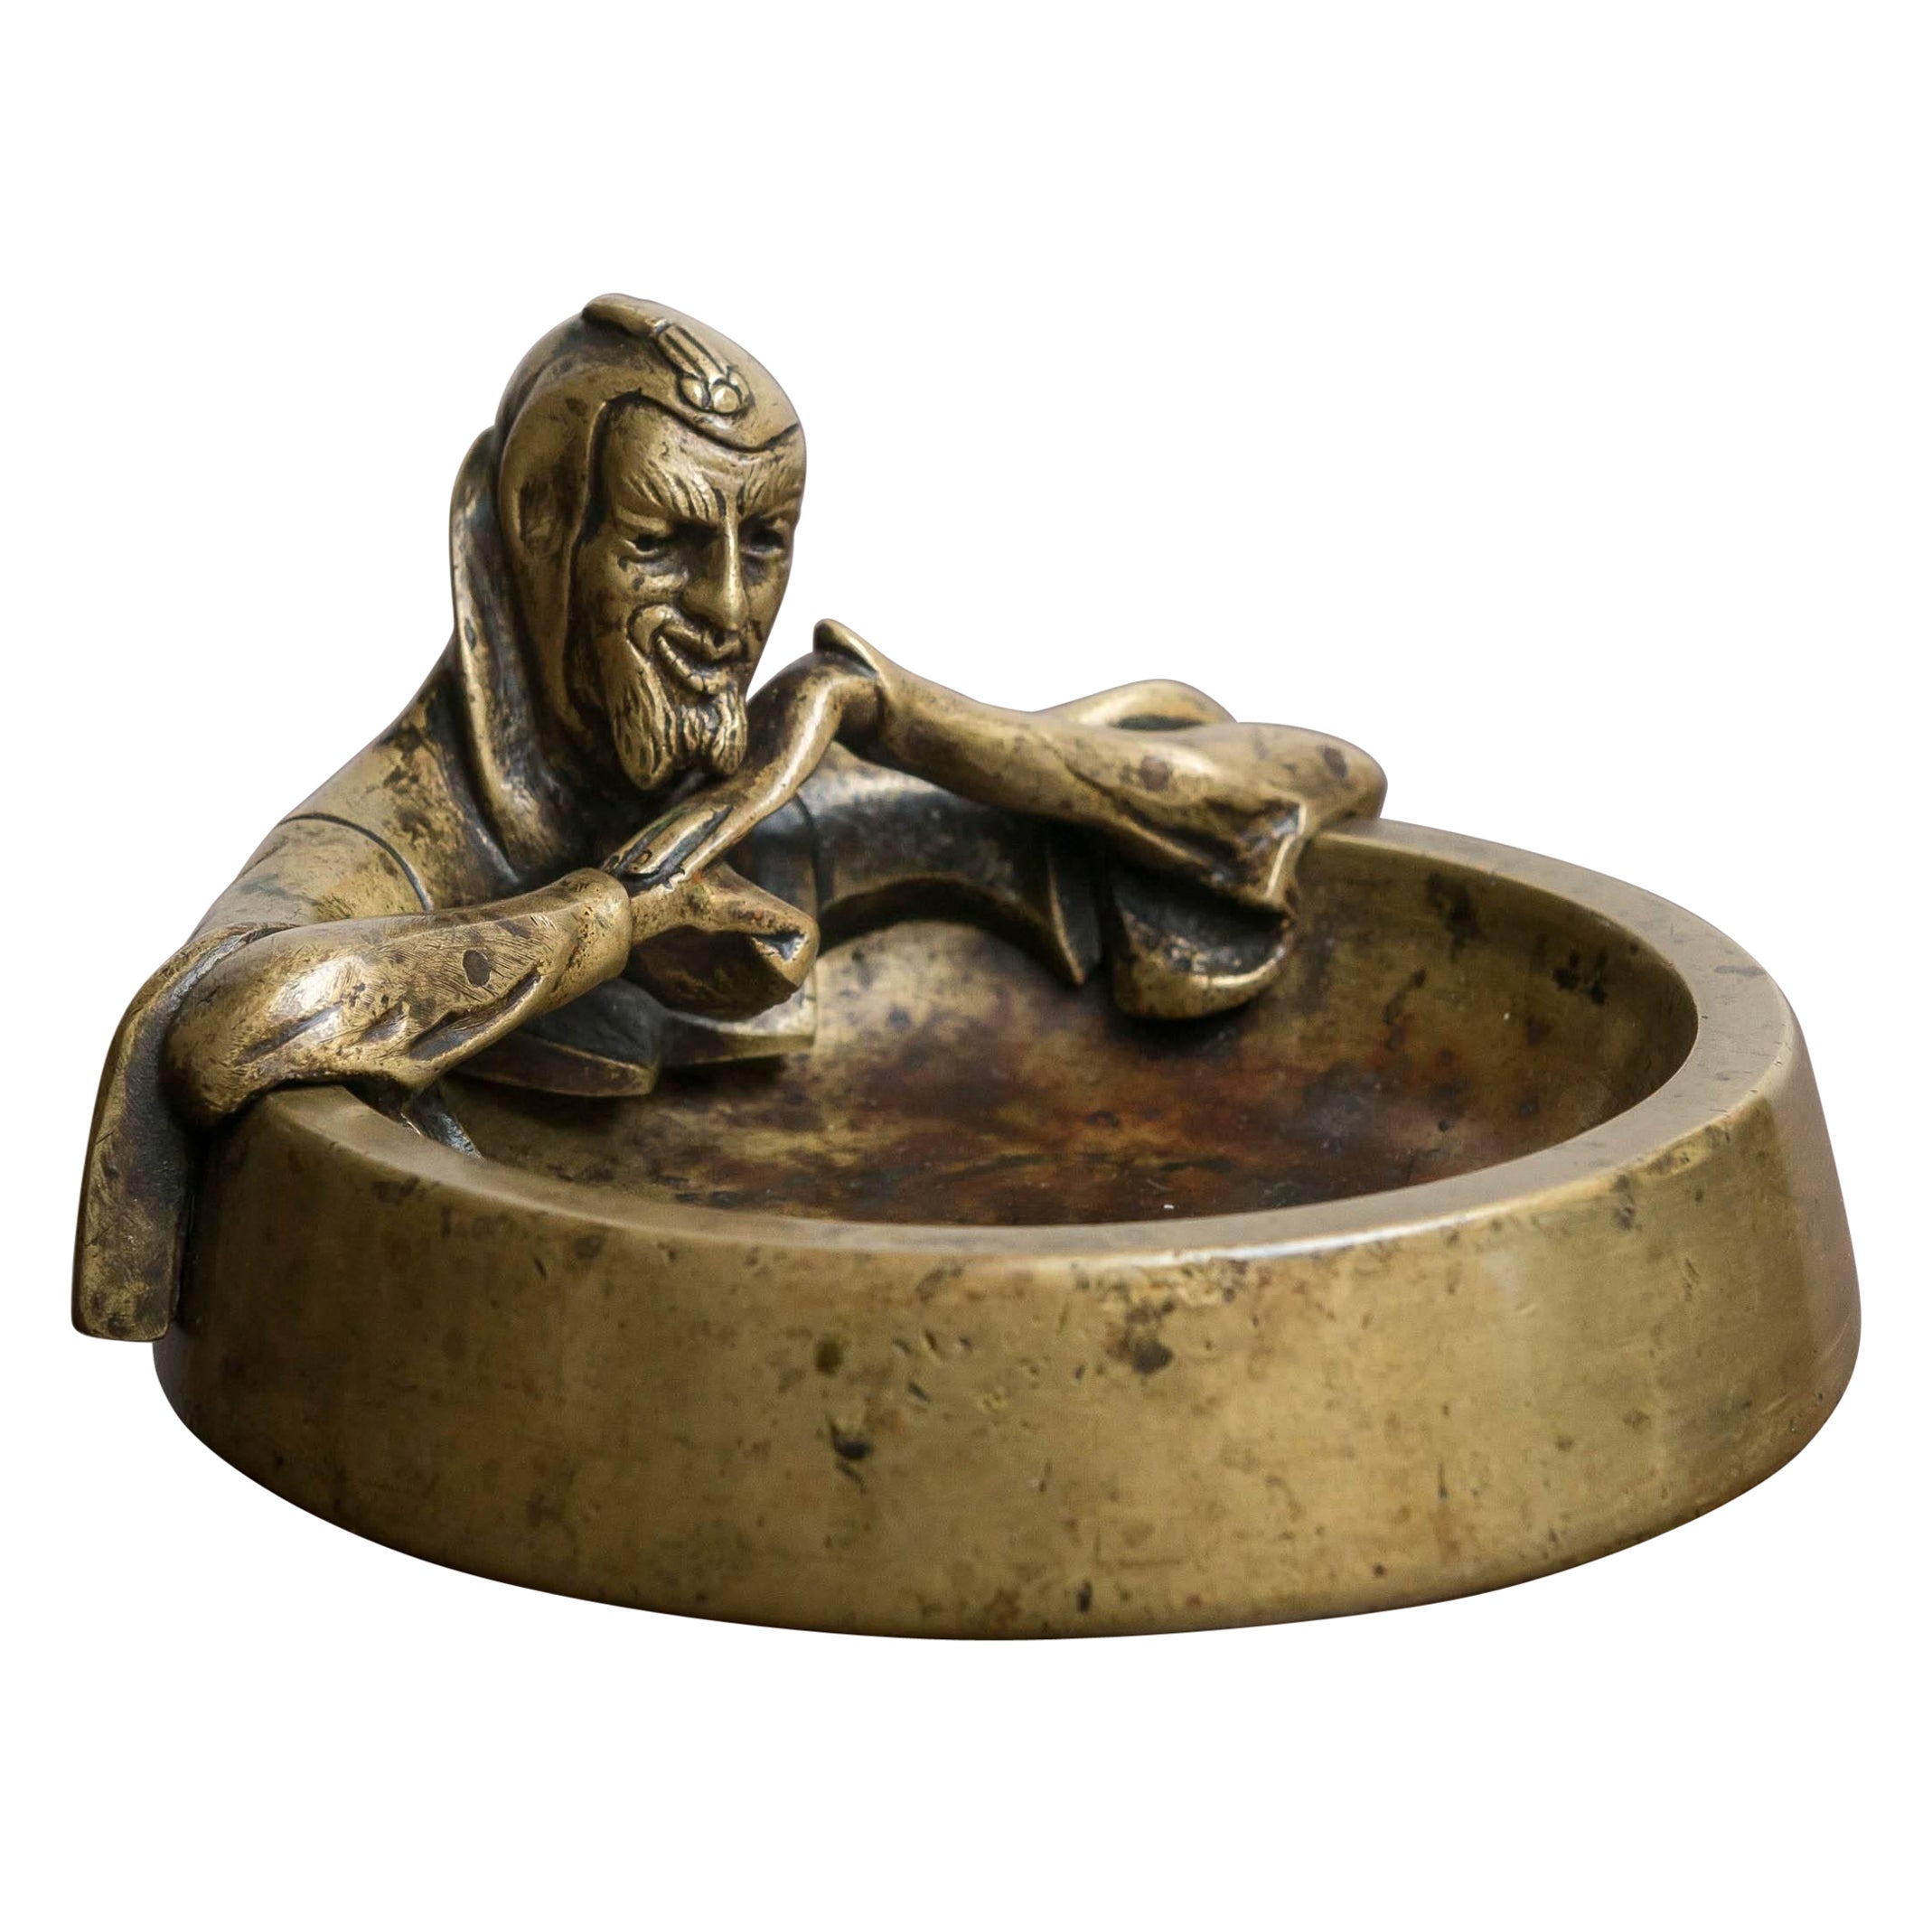 Late 19th C Effigy of Mephistopheles on a Bronze Dresser Tray